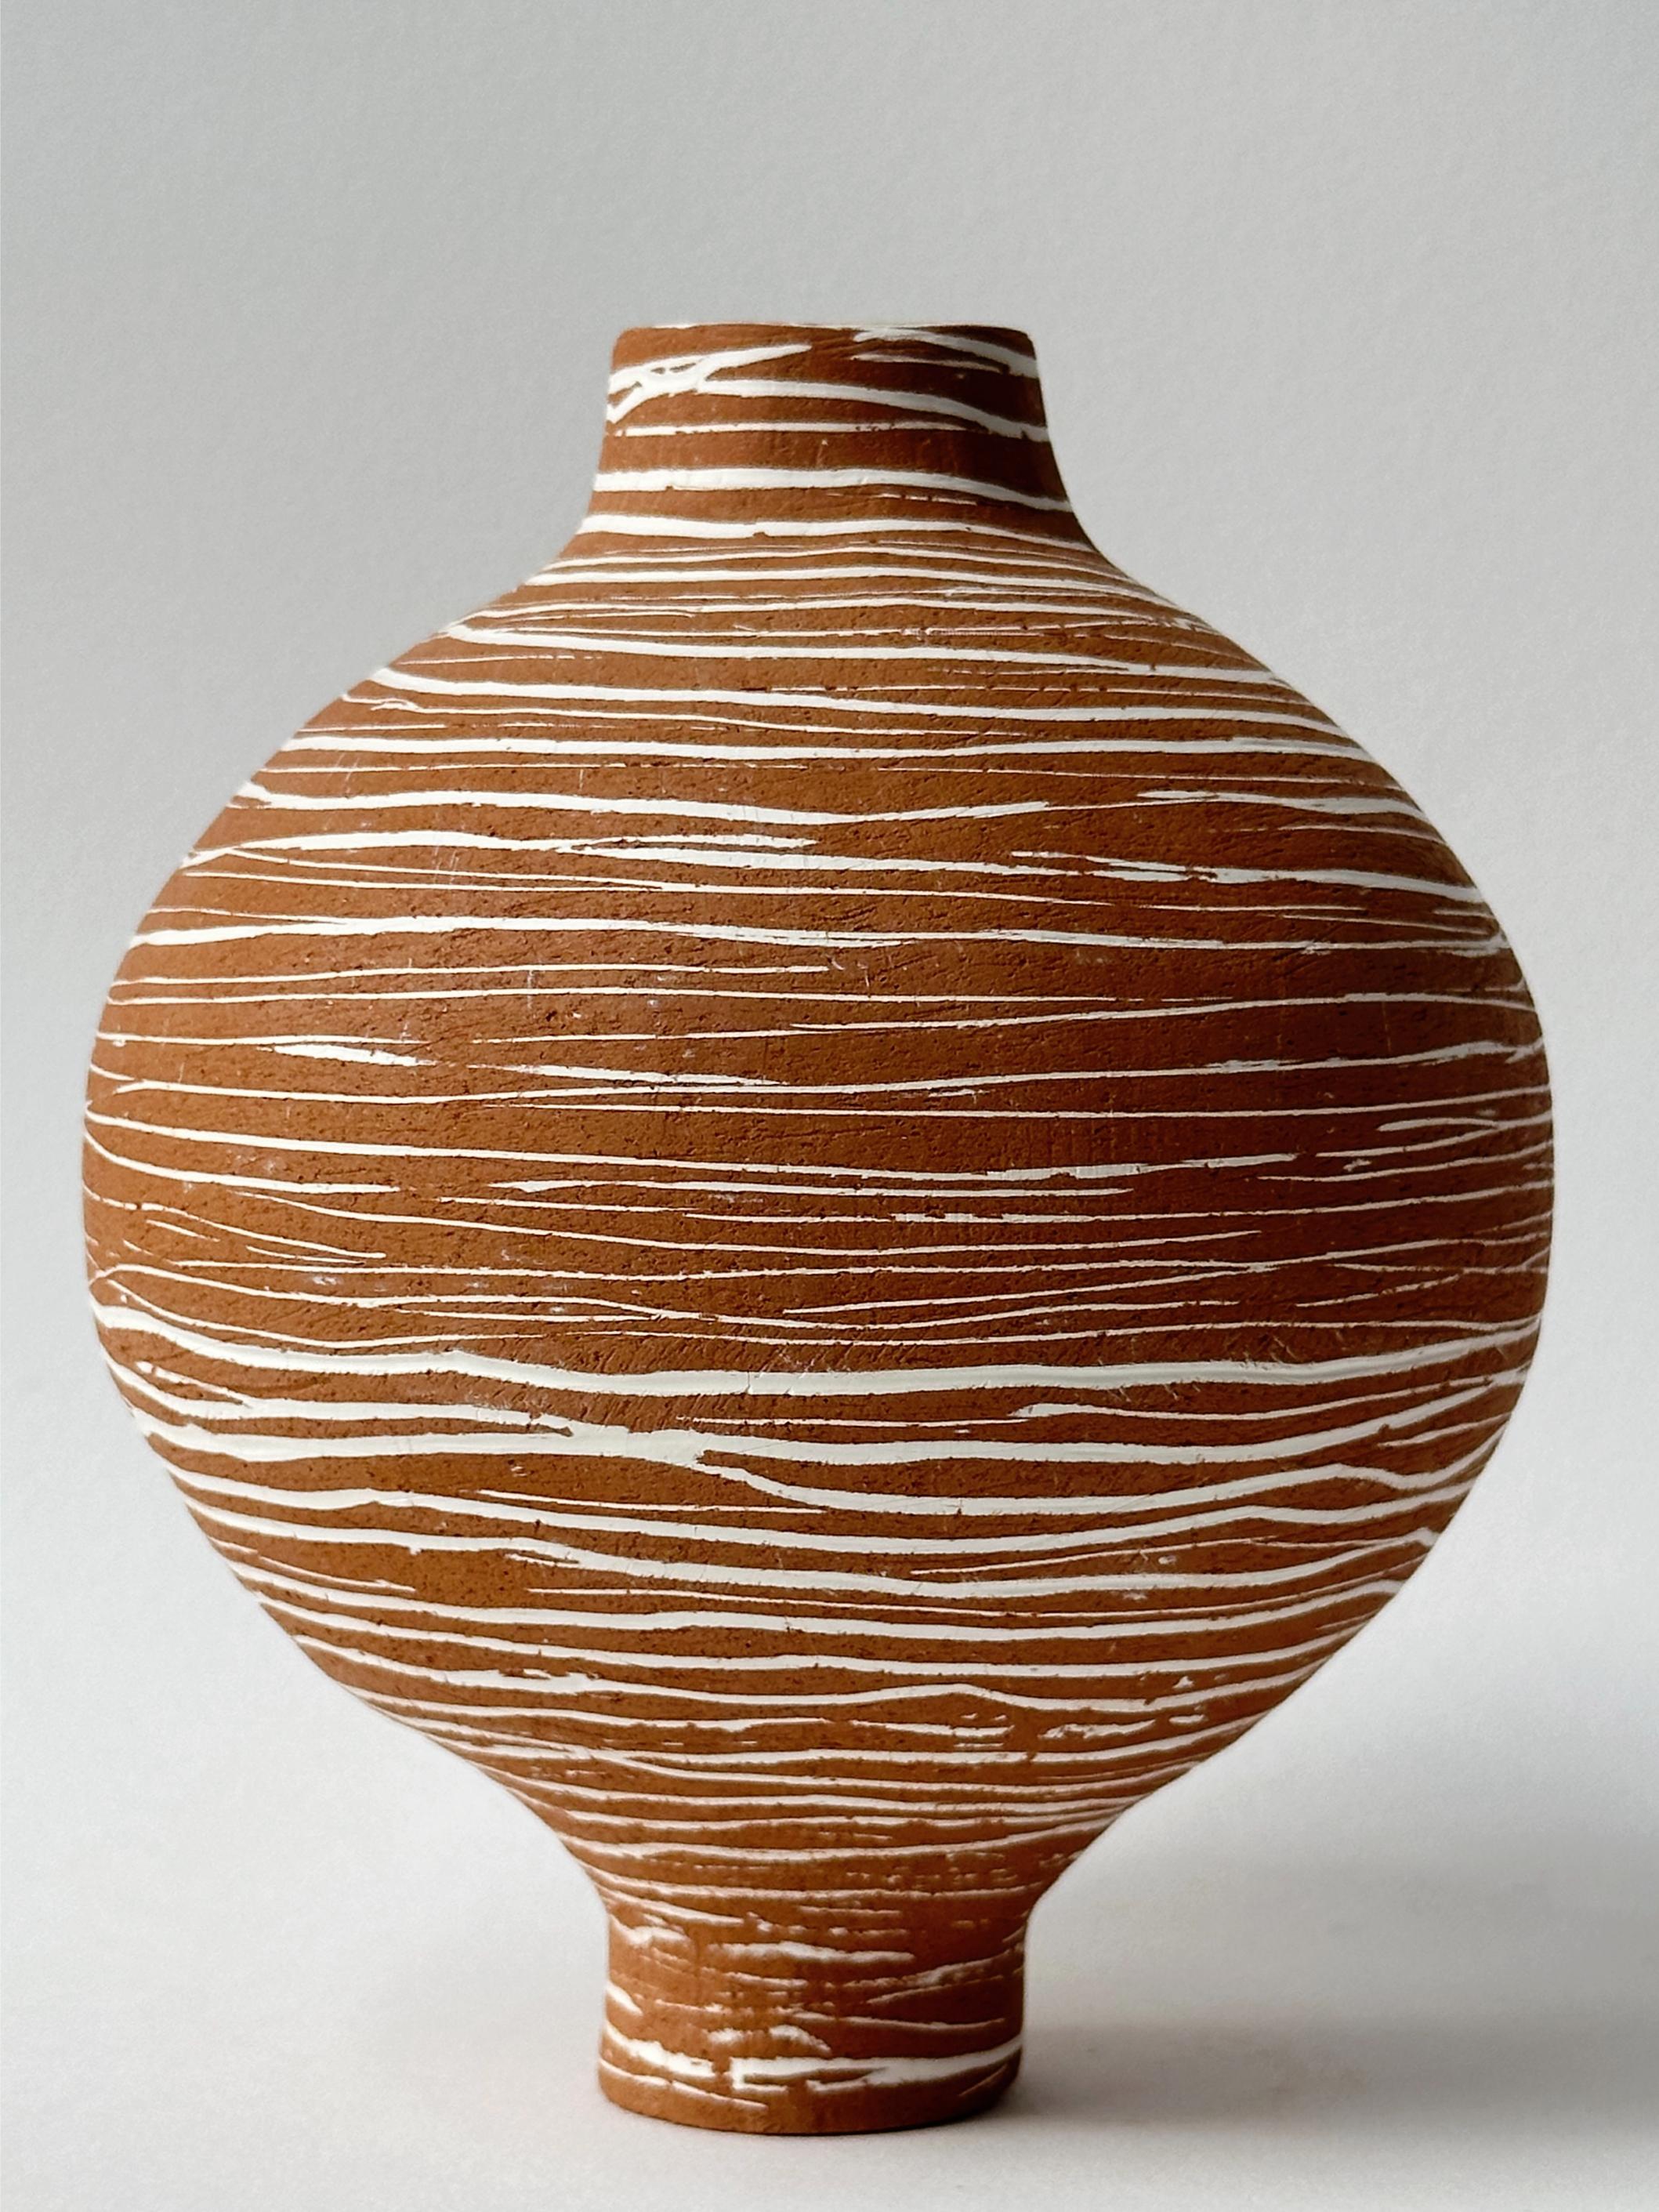 Terracotta Moon Jar No 13 by Elena Vasilantonaki
Unique
Dimensions: ⌀ 13.5 x H 16.5 cm (Dimensions may vary)
Materials: Local Terracotta Clay from the Island of
Crete

Growing up in Greece I was surrounded by pottery forms that have changed little